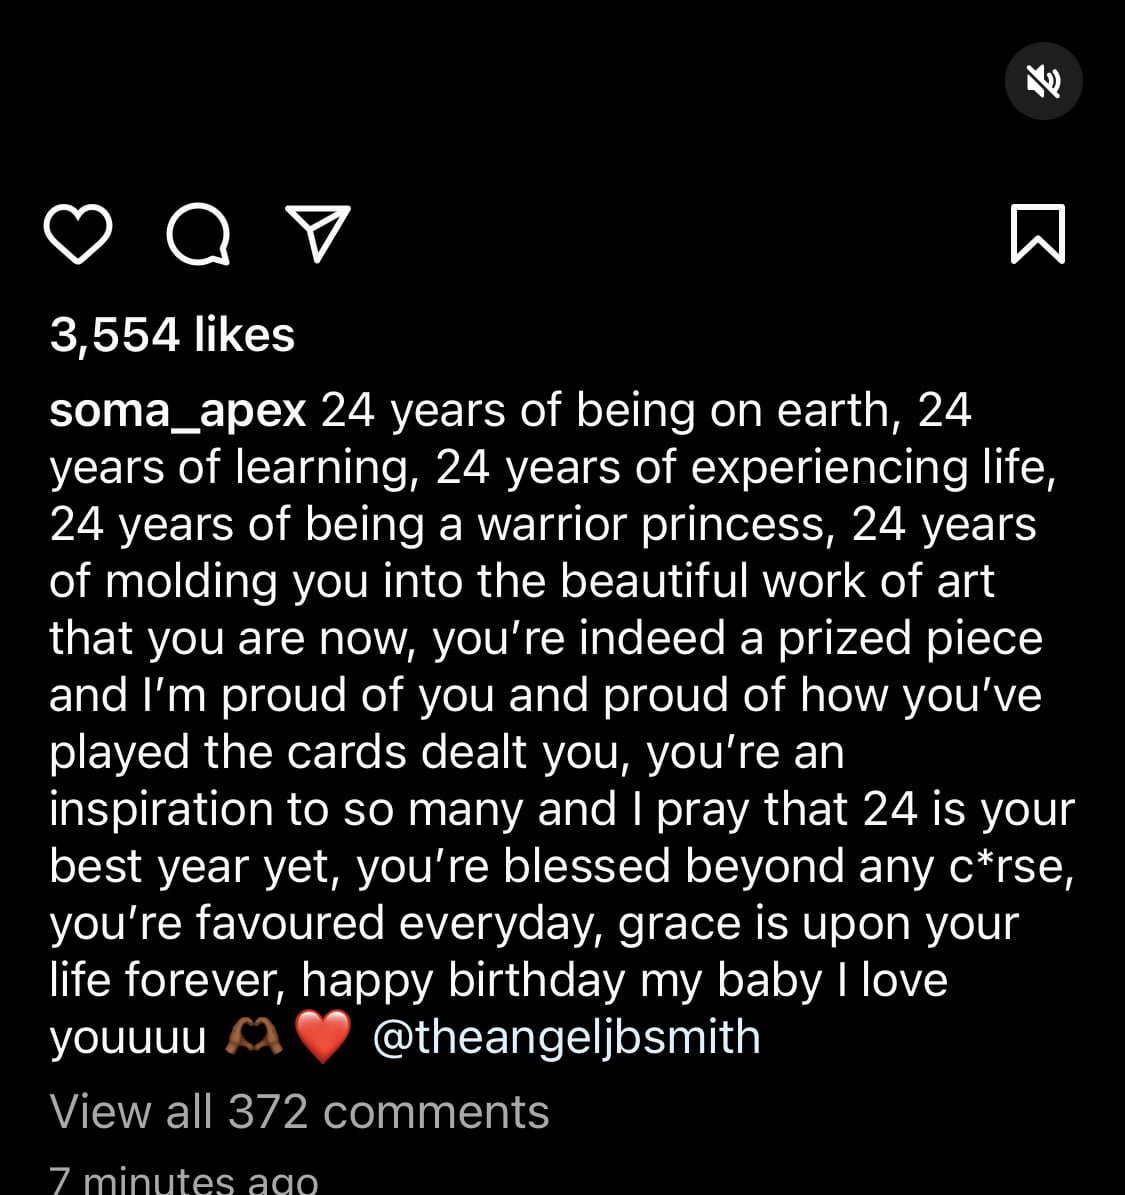 Soma’s birthday message to Angel that had fans gushing.